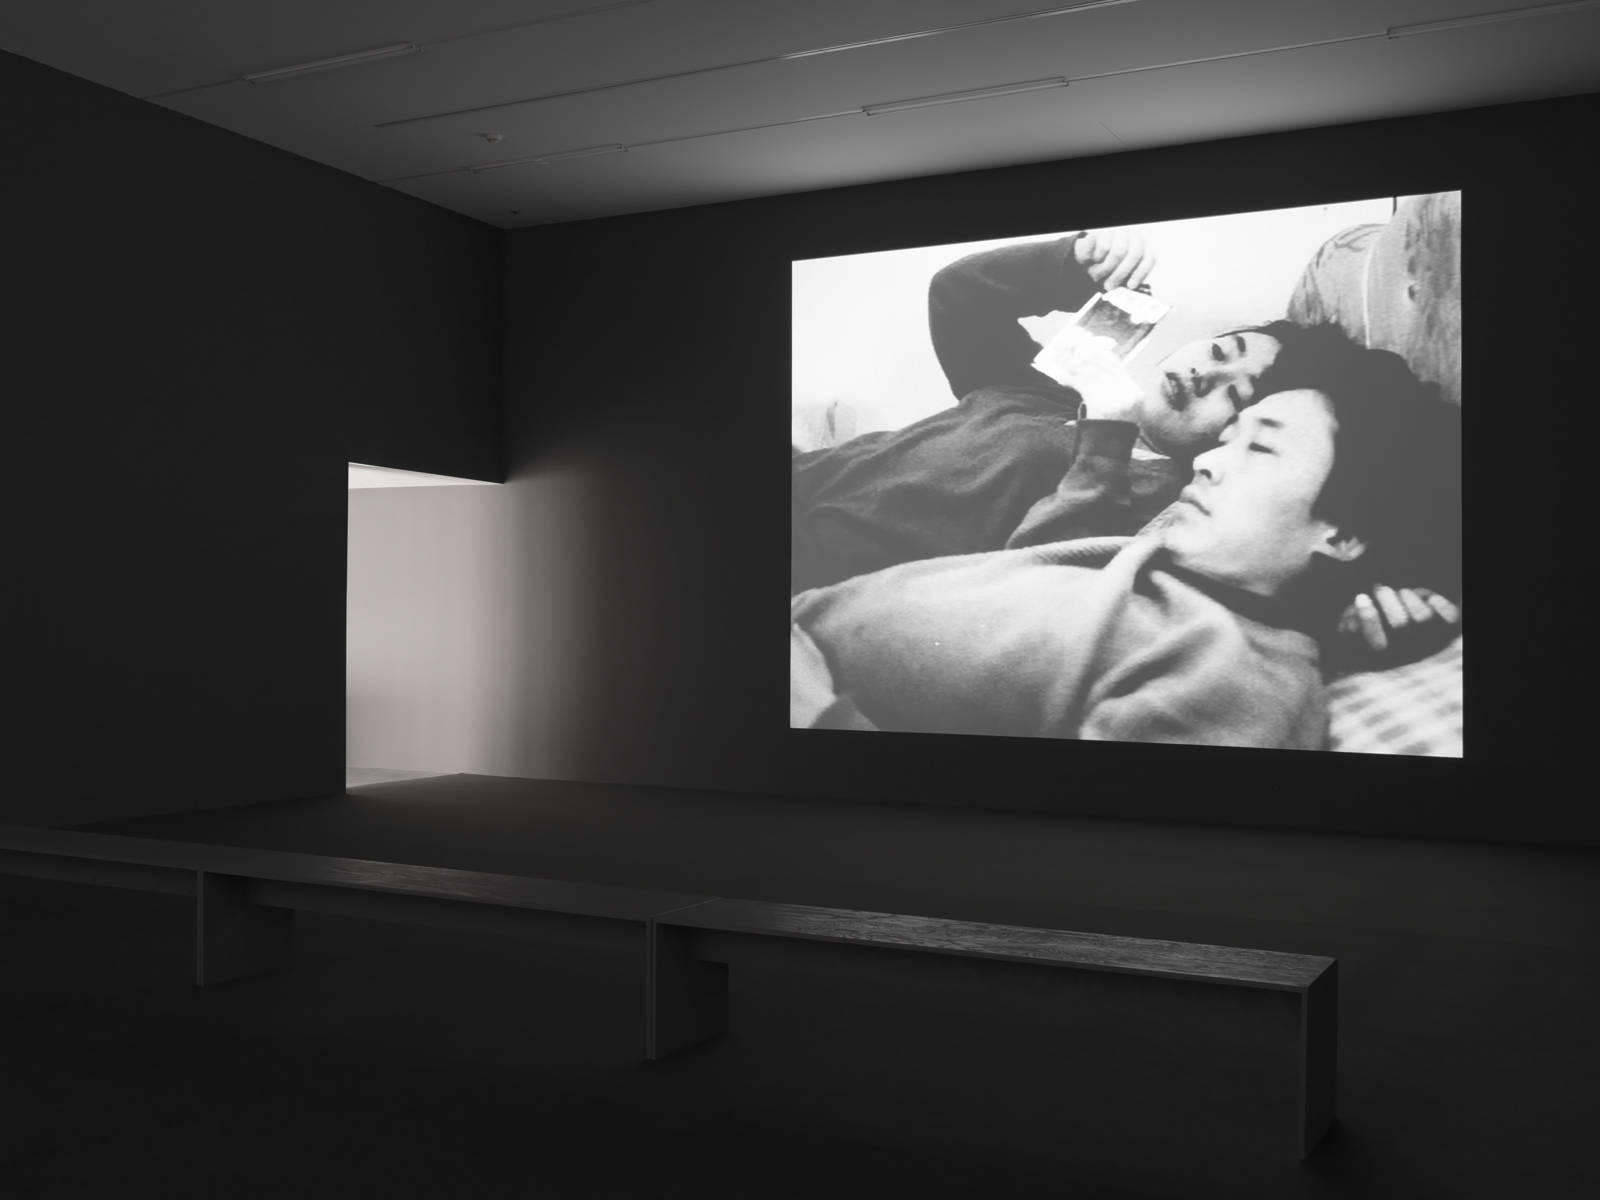 Yang Fudong / "Estranged Paradise. Works 1993–2013", exhibition view, Kunsthalle Zürich  / 2013